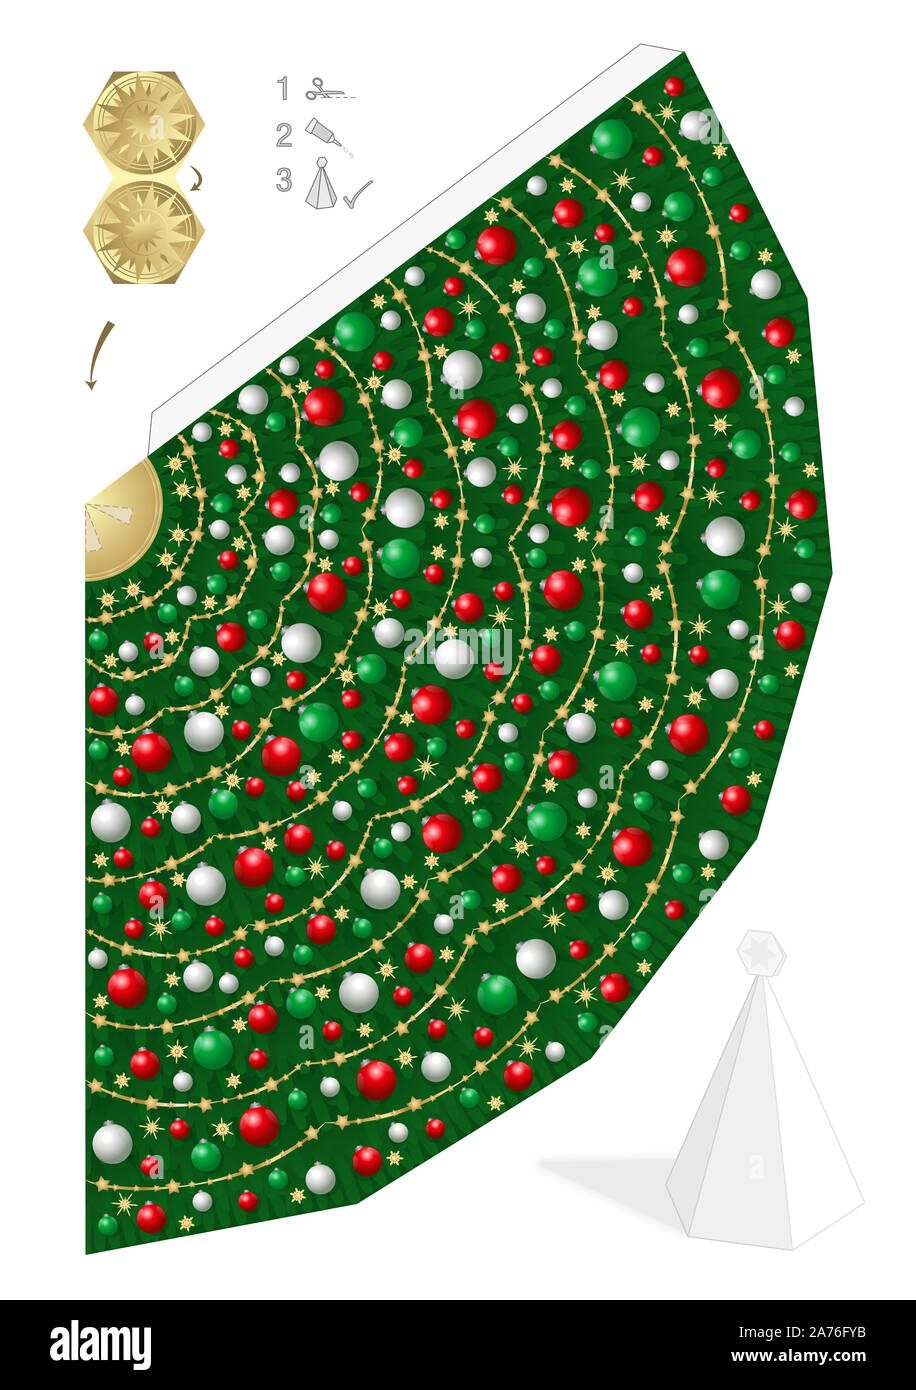 Paper model of christmas tree with red, green and white christmas balls and straw stars. Template to cut out, to fold and glue. Stock Photo